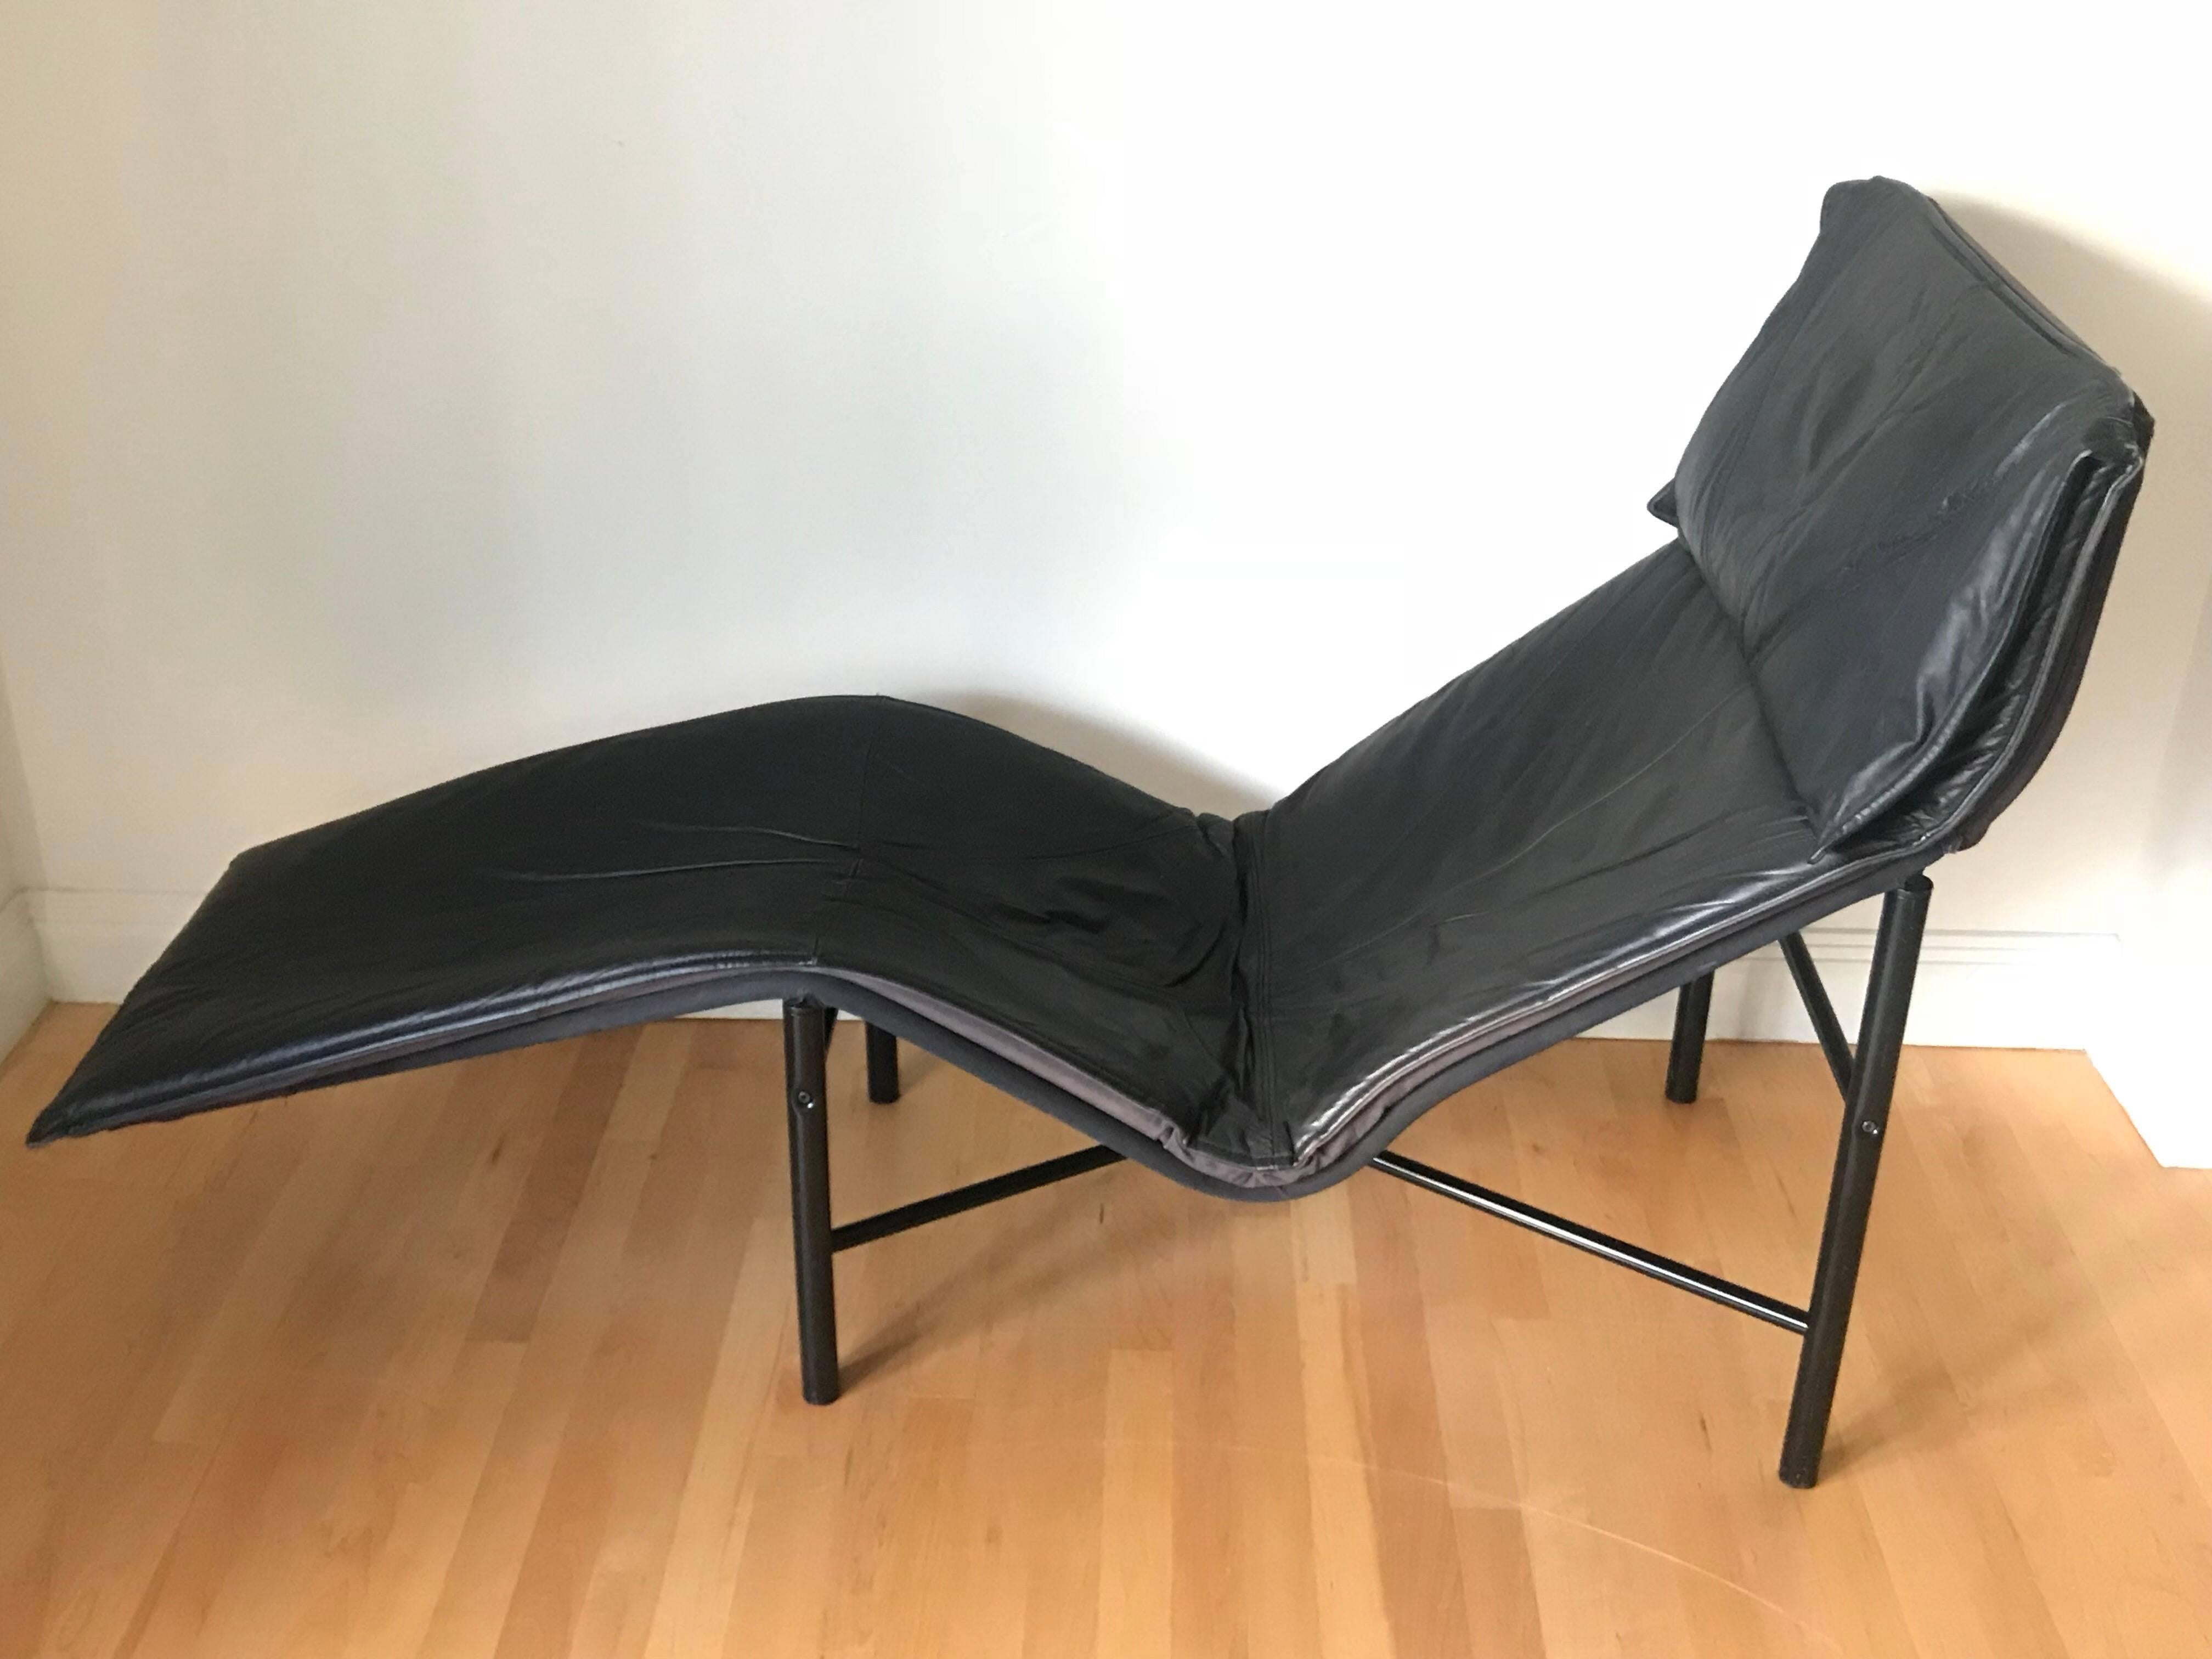 Postmodern chaise lounge rendered in black leather and a steel frame designed by Tord Björklund for Ikea, Sweden, circa 1980s.